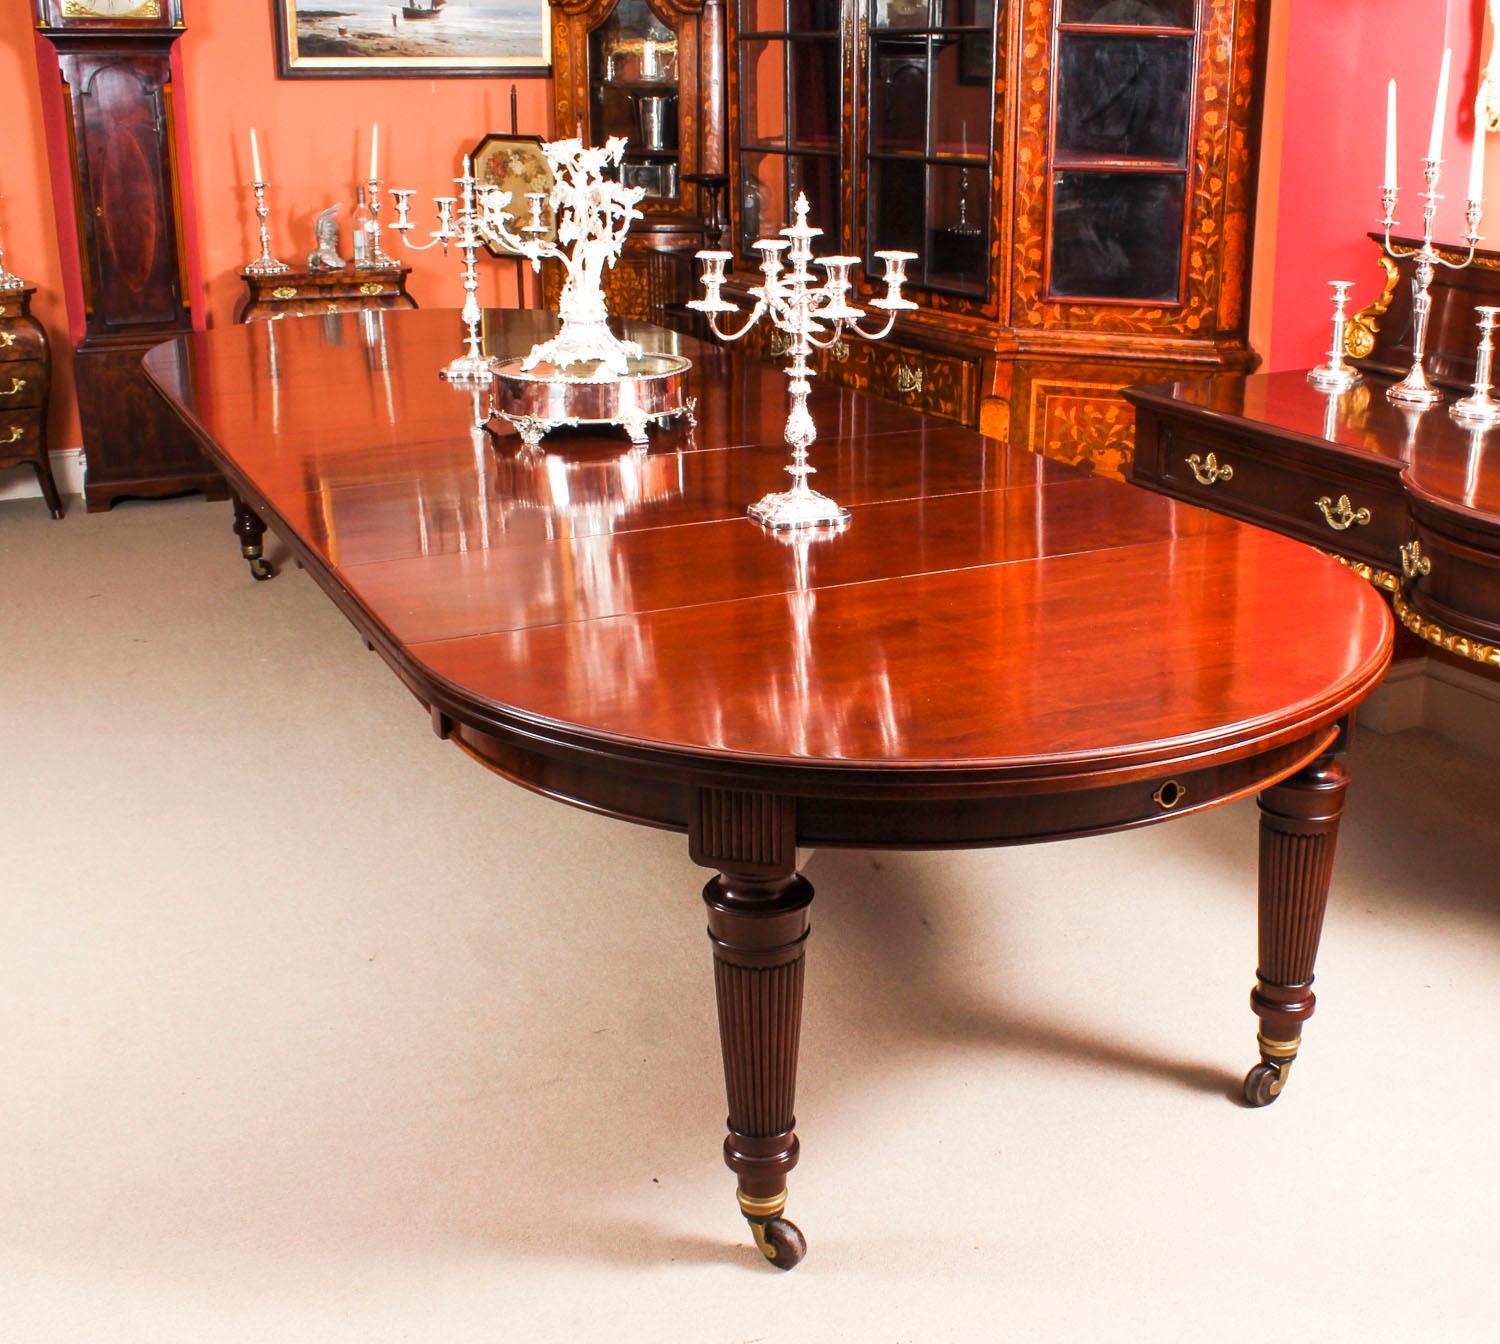 This is a magnificent antique Victorian solid mahogany dining table which can seat fourteen diners in comfort and is also ideal for use as a conference table. It is circa 1870 in date.

This beautiful table is circular in shape when all the leaves